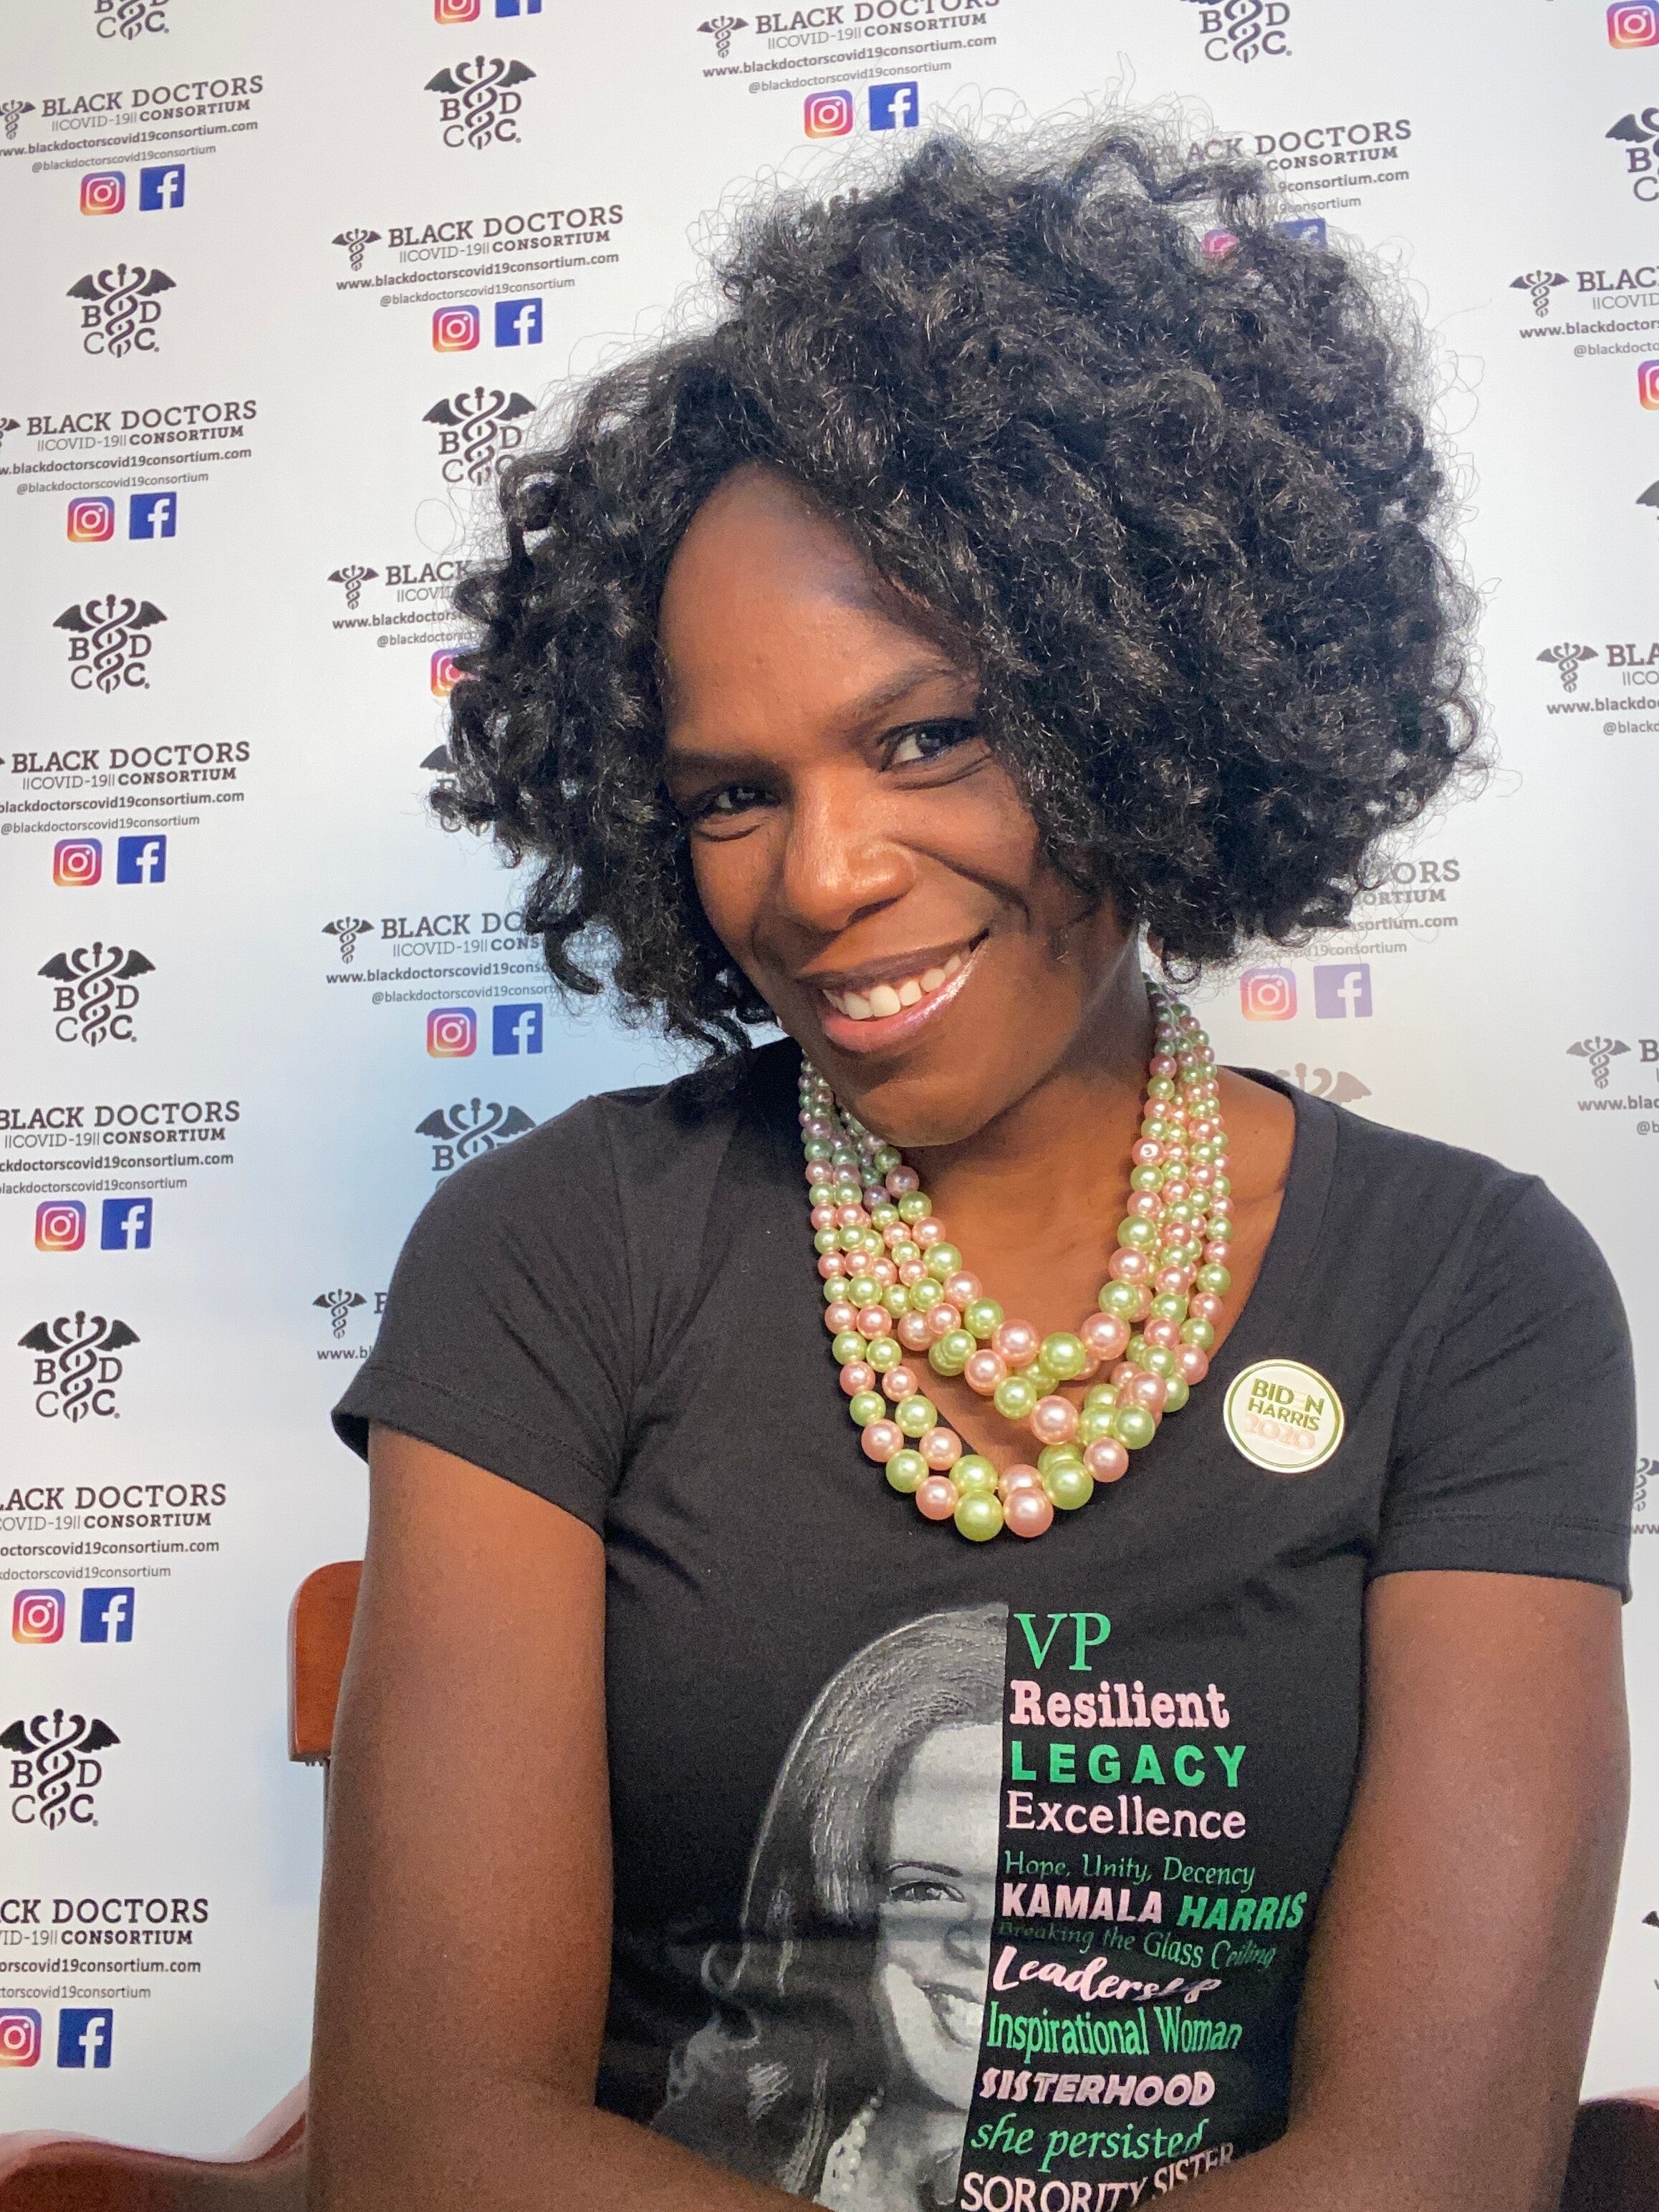 Dr. Ala Stanford wears pearls and a t-shirt that features the face of Vice President Hamala Harris